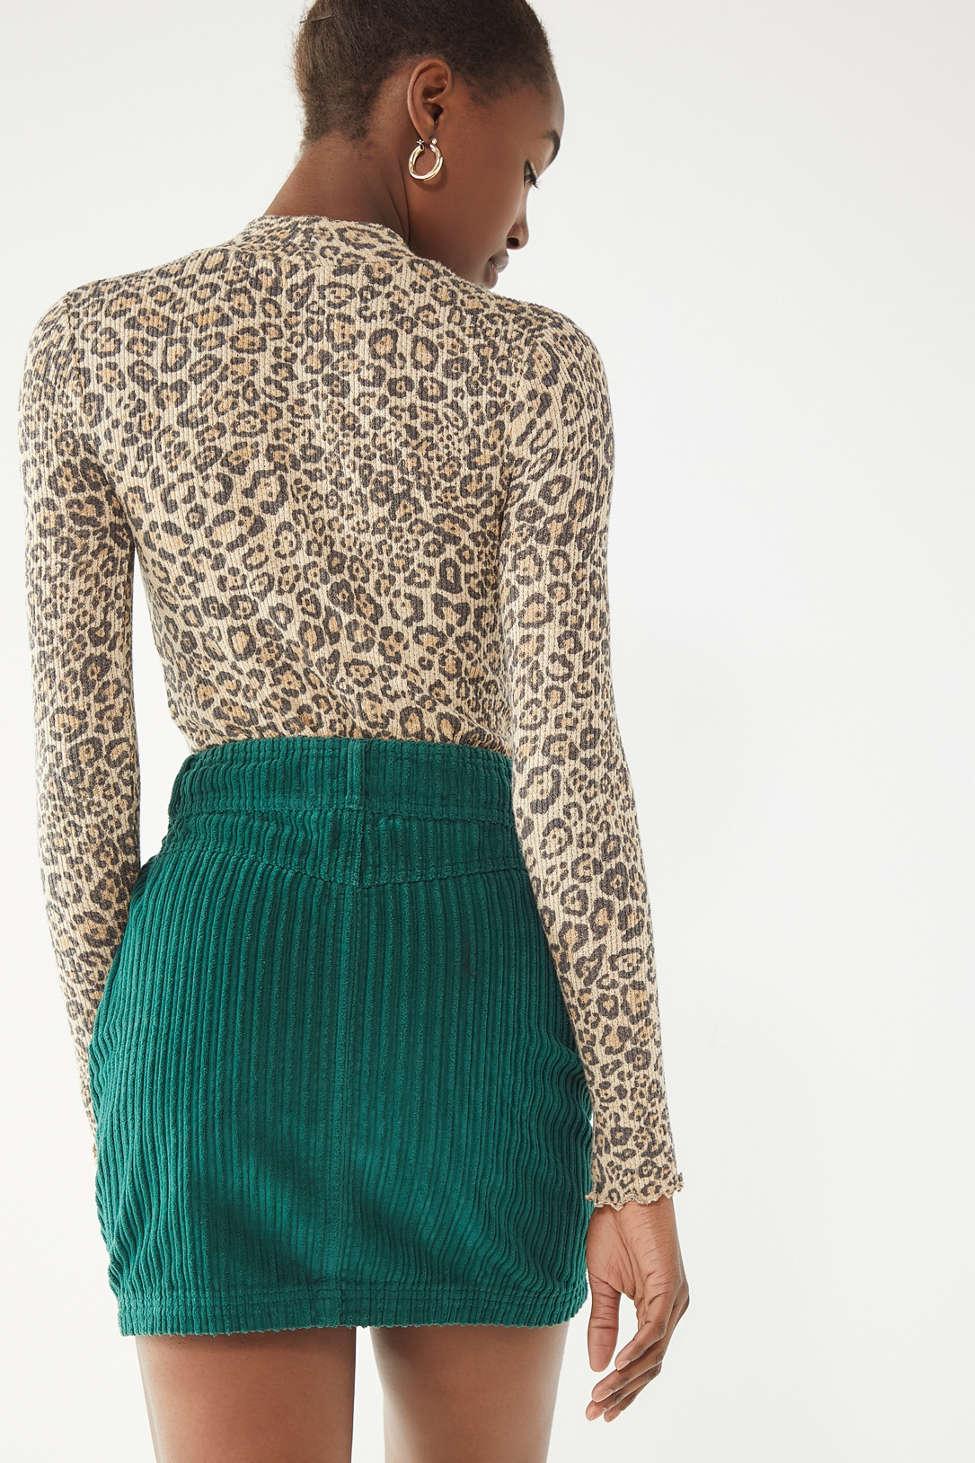 Urban Outfitters Uo New York Minute Corduroy Skirt in Green - Lyst